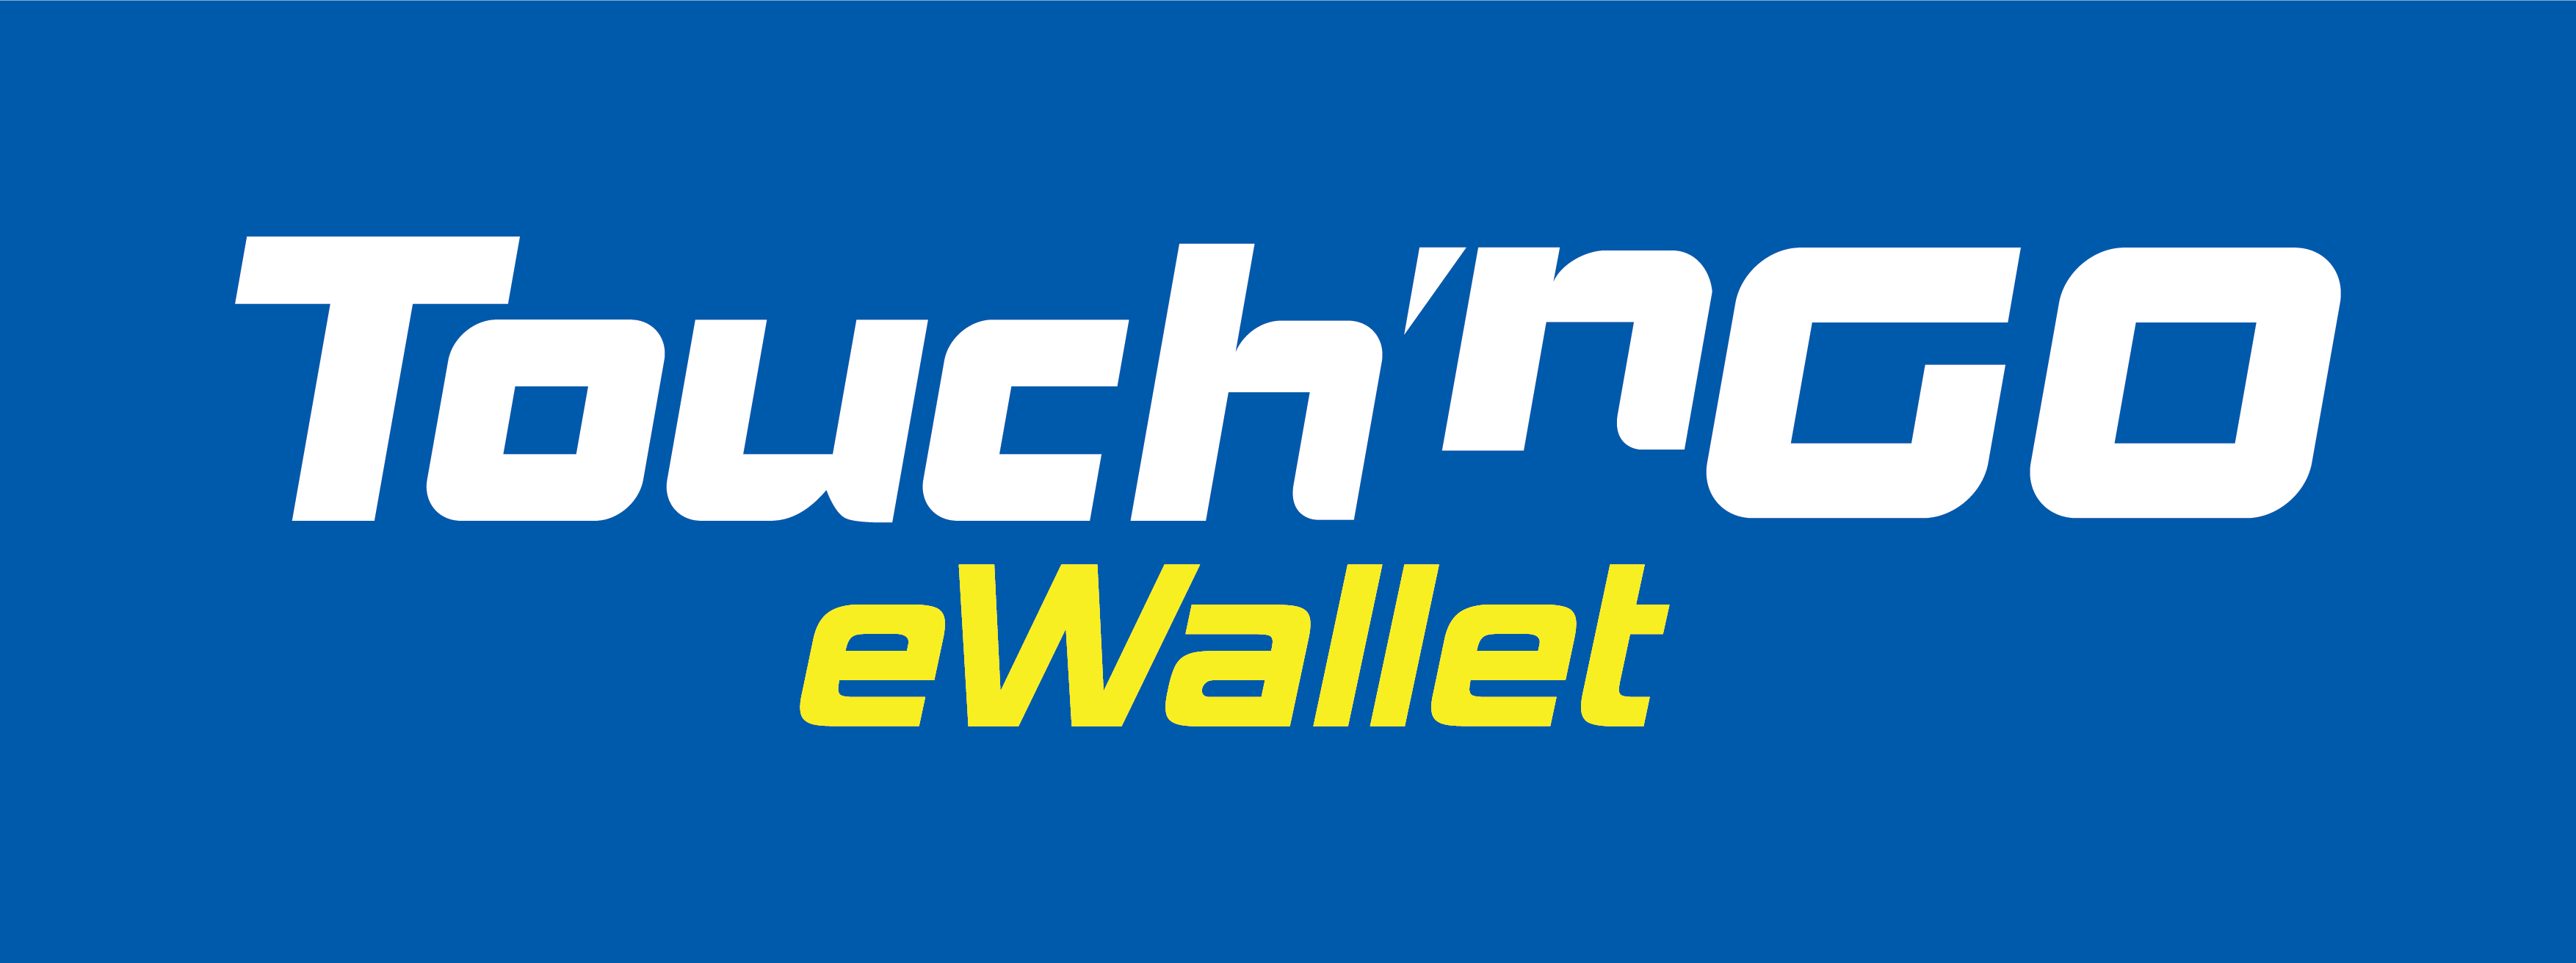 who owns touch n go ewallet